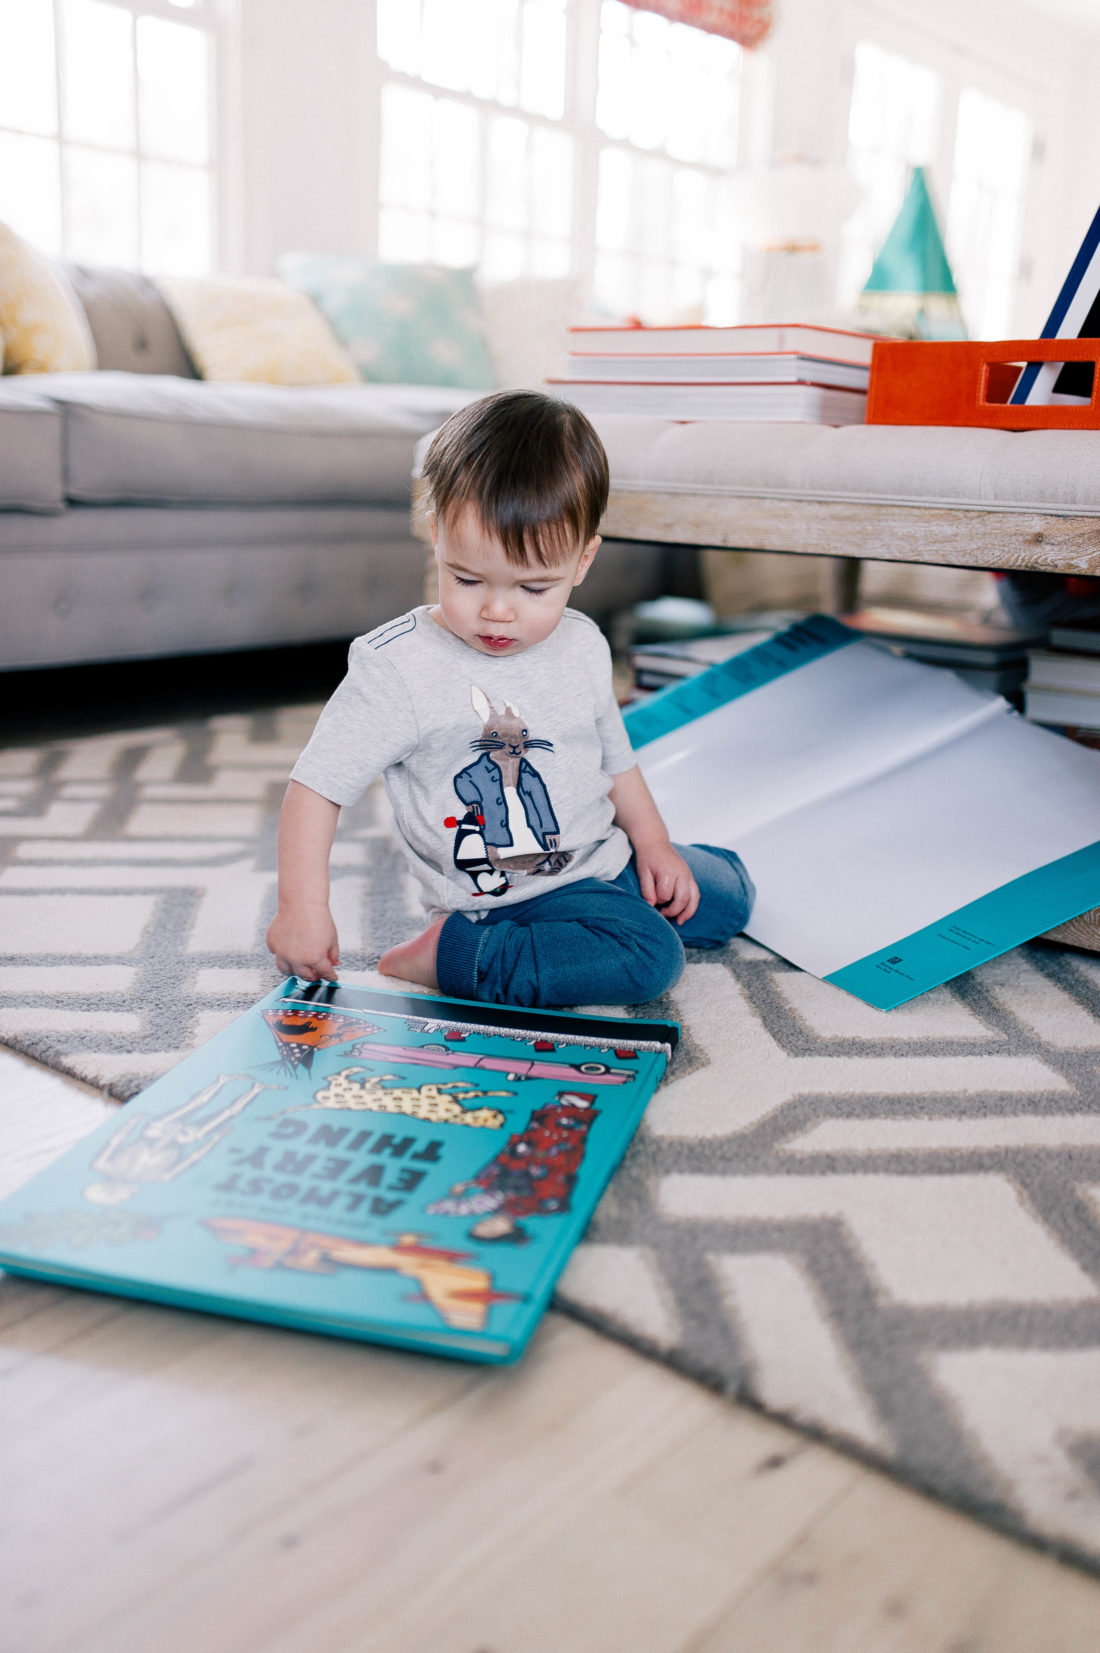 Major Martino wears a Peter Rabbit tee shirt and reads books on the floor of the family room